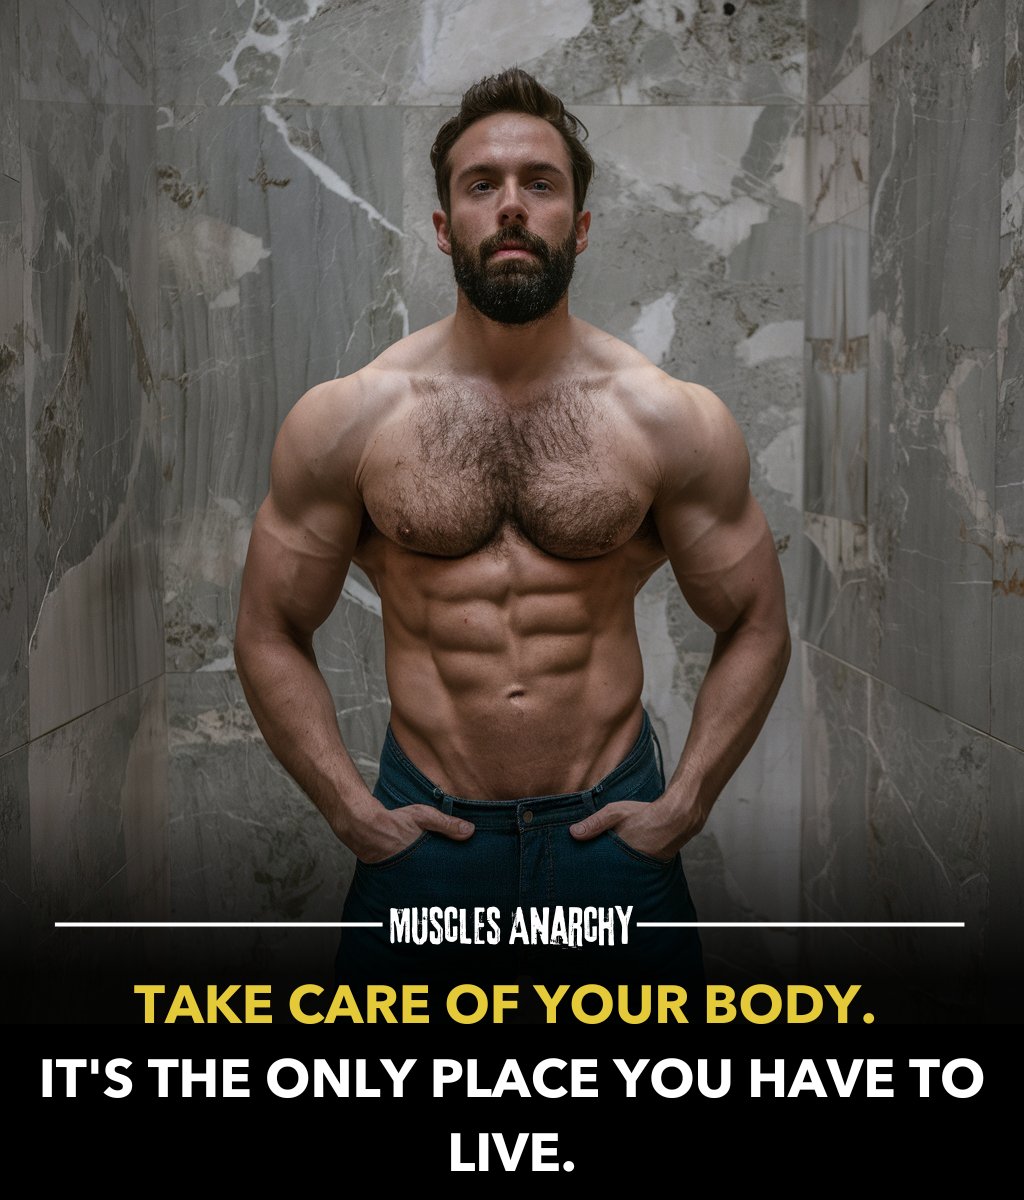 Take care of your body. It's the only place you have to live.

#gymmotivation #gymmotivationquotes #selfimprovement #buildyourdream